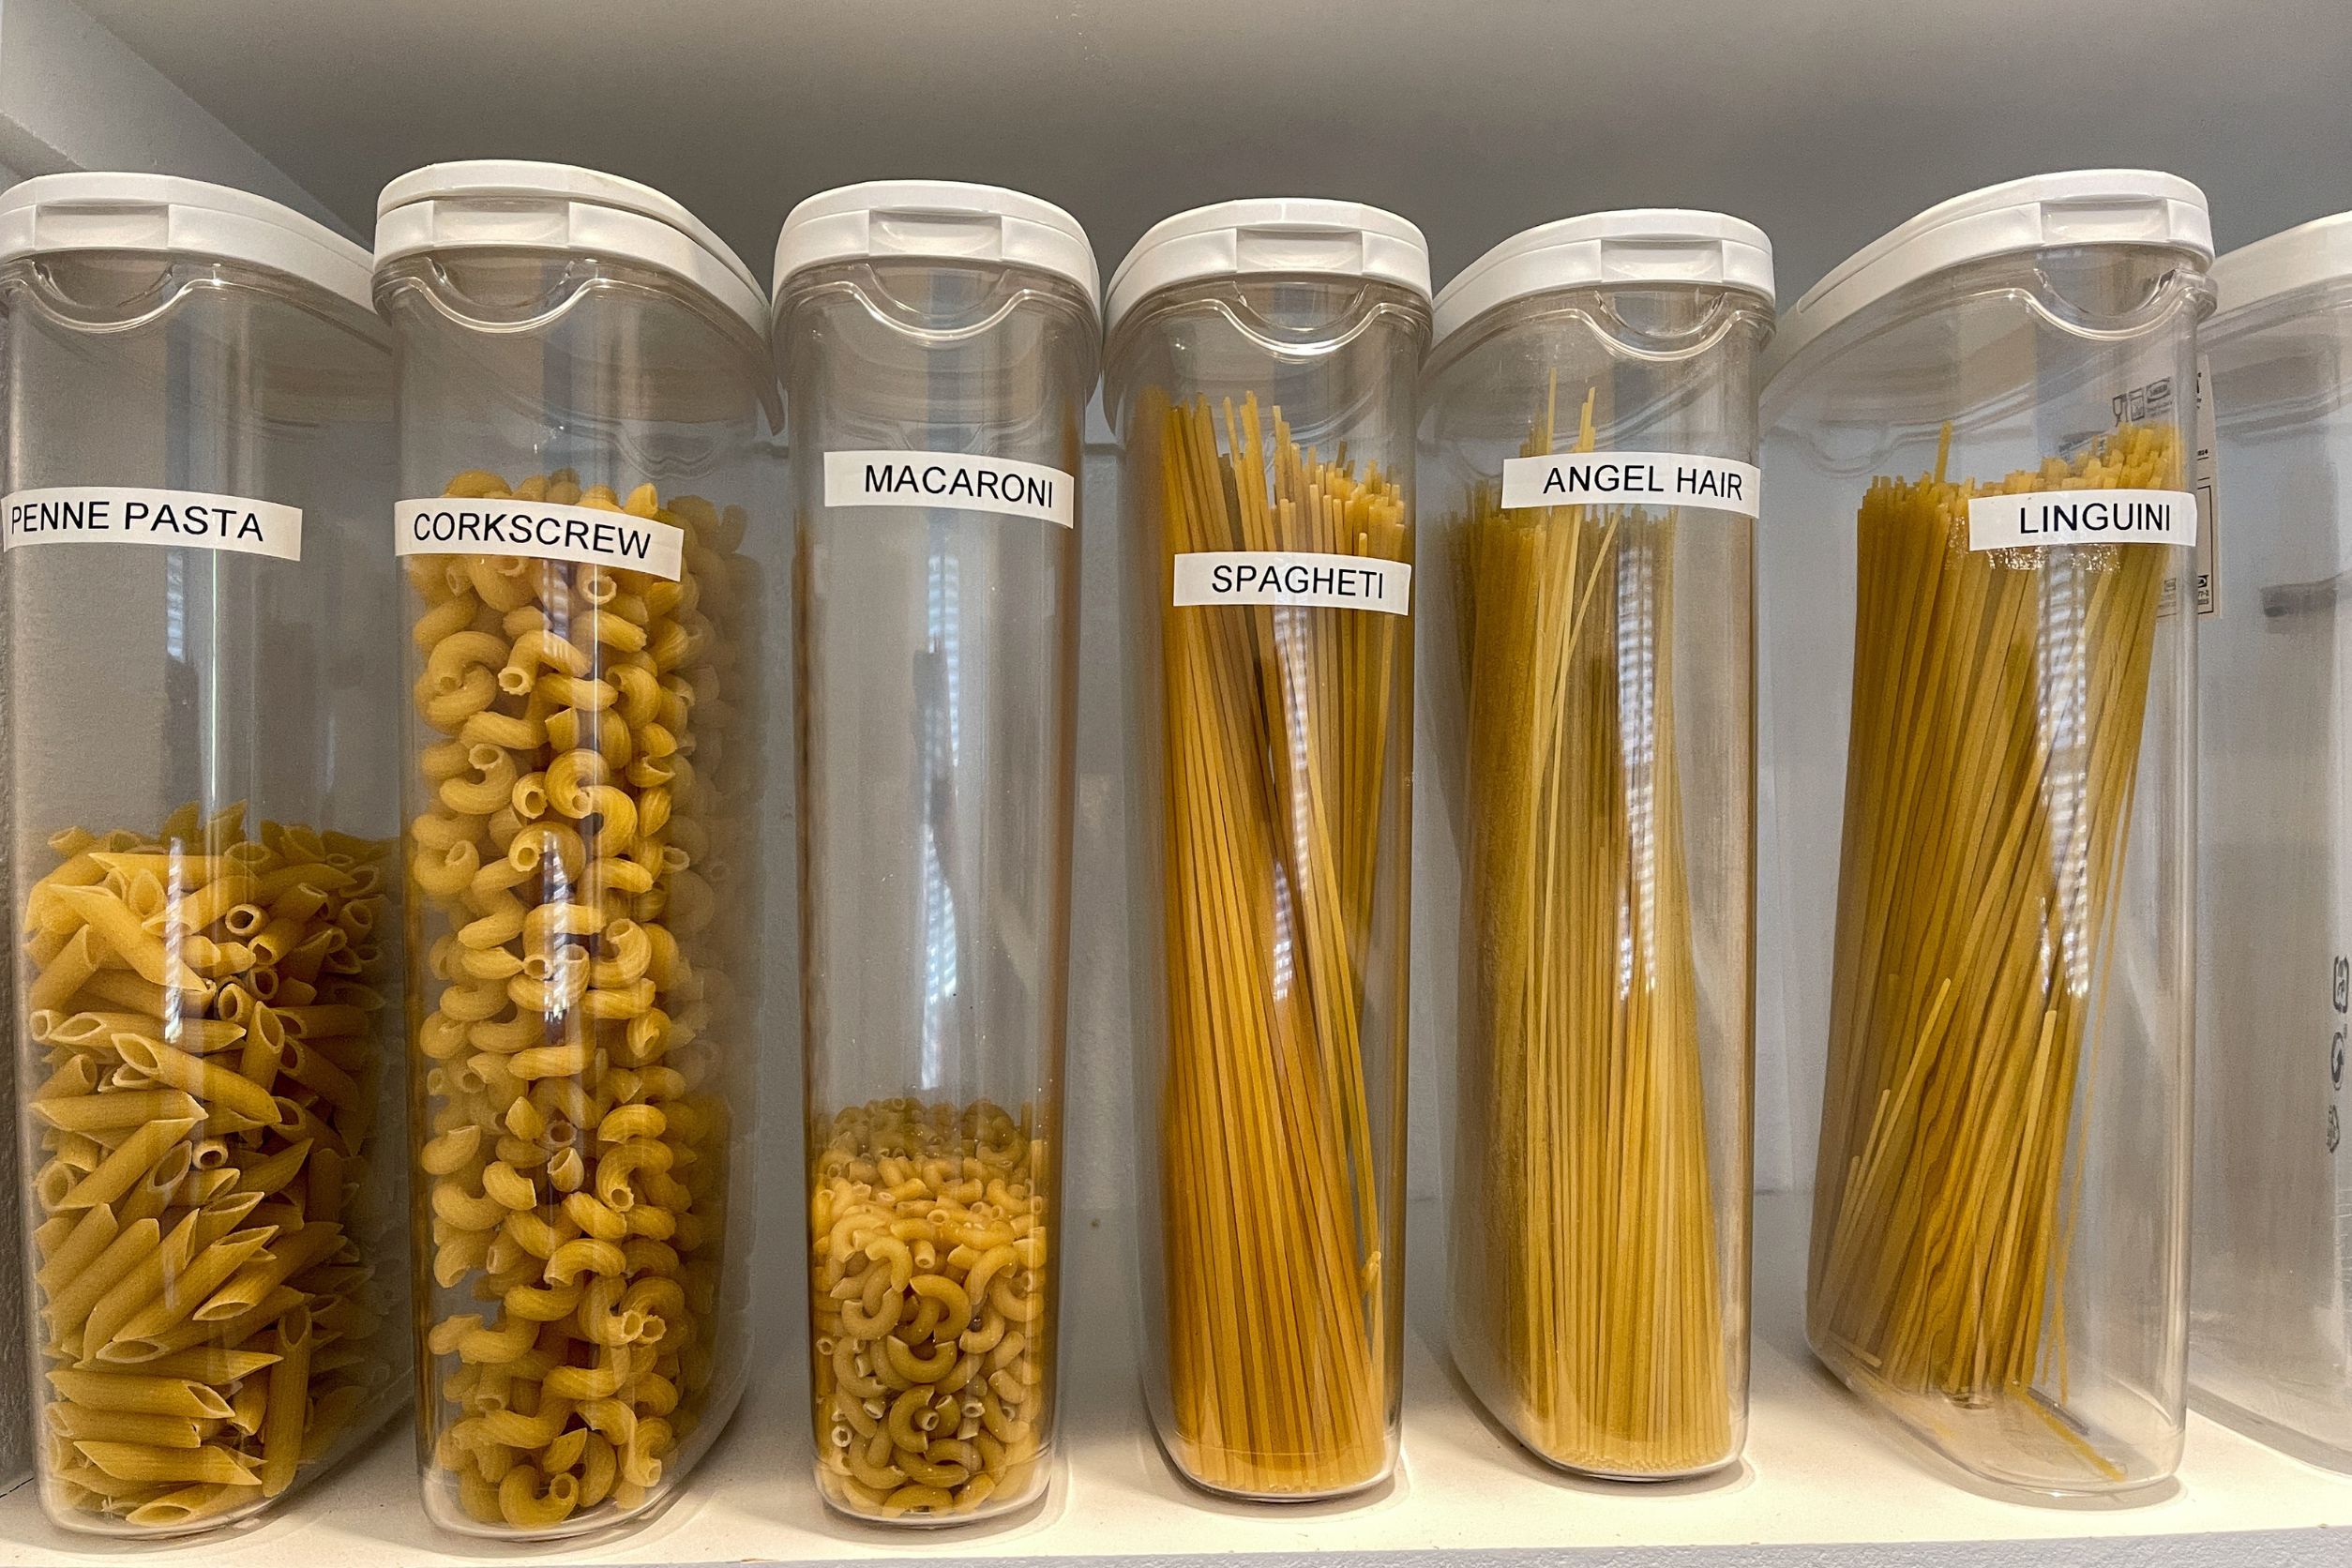 A pantry without pasta is a cardinal sin